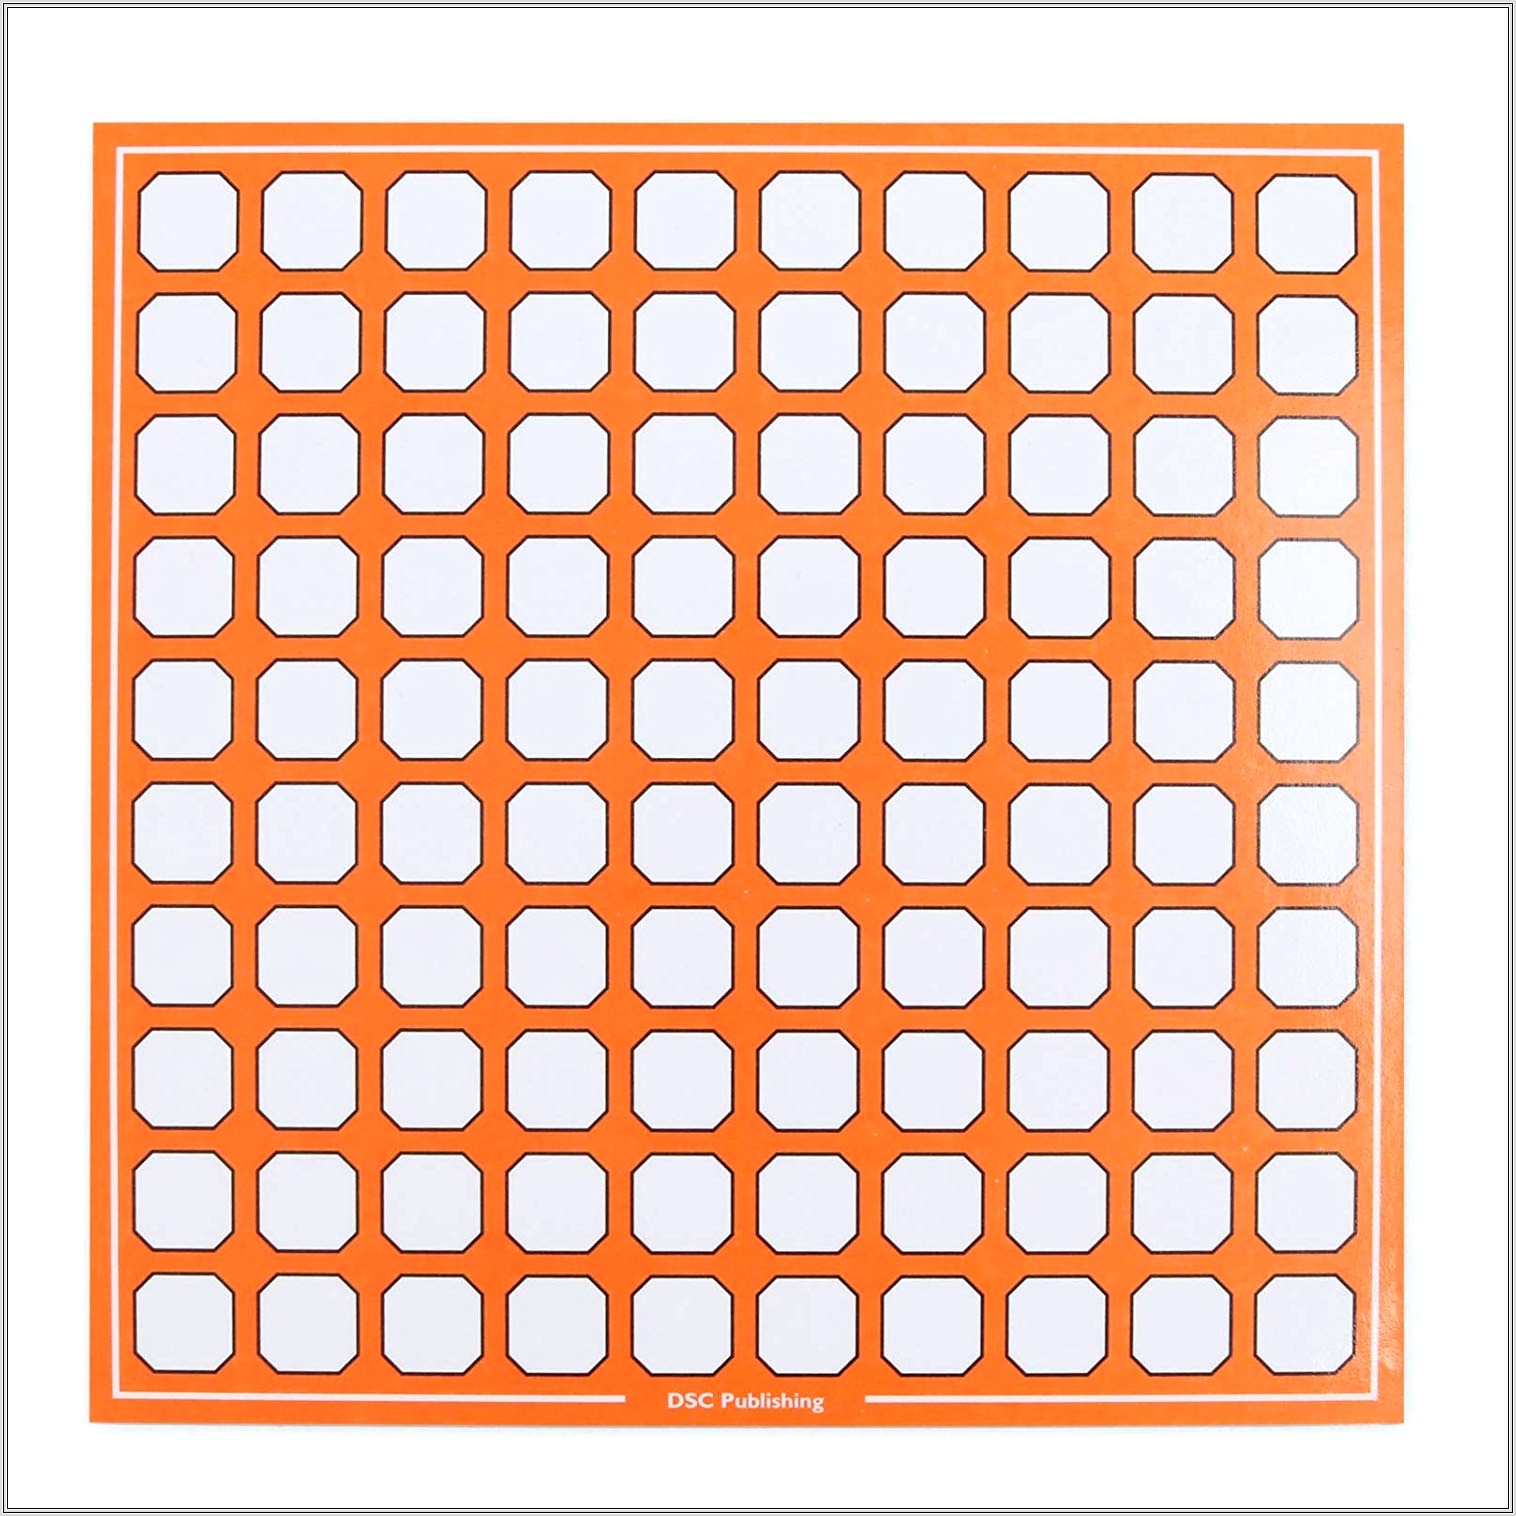 100 Times Tables Grid